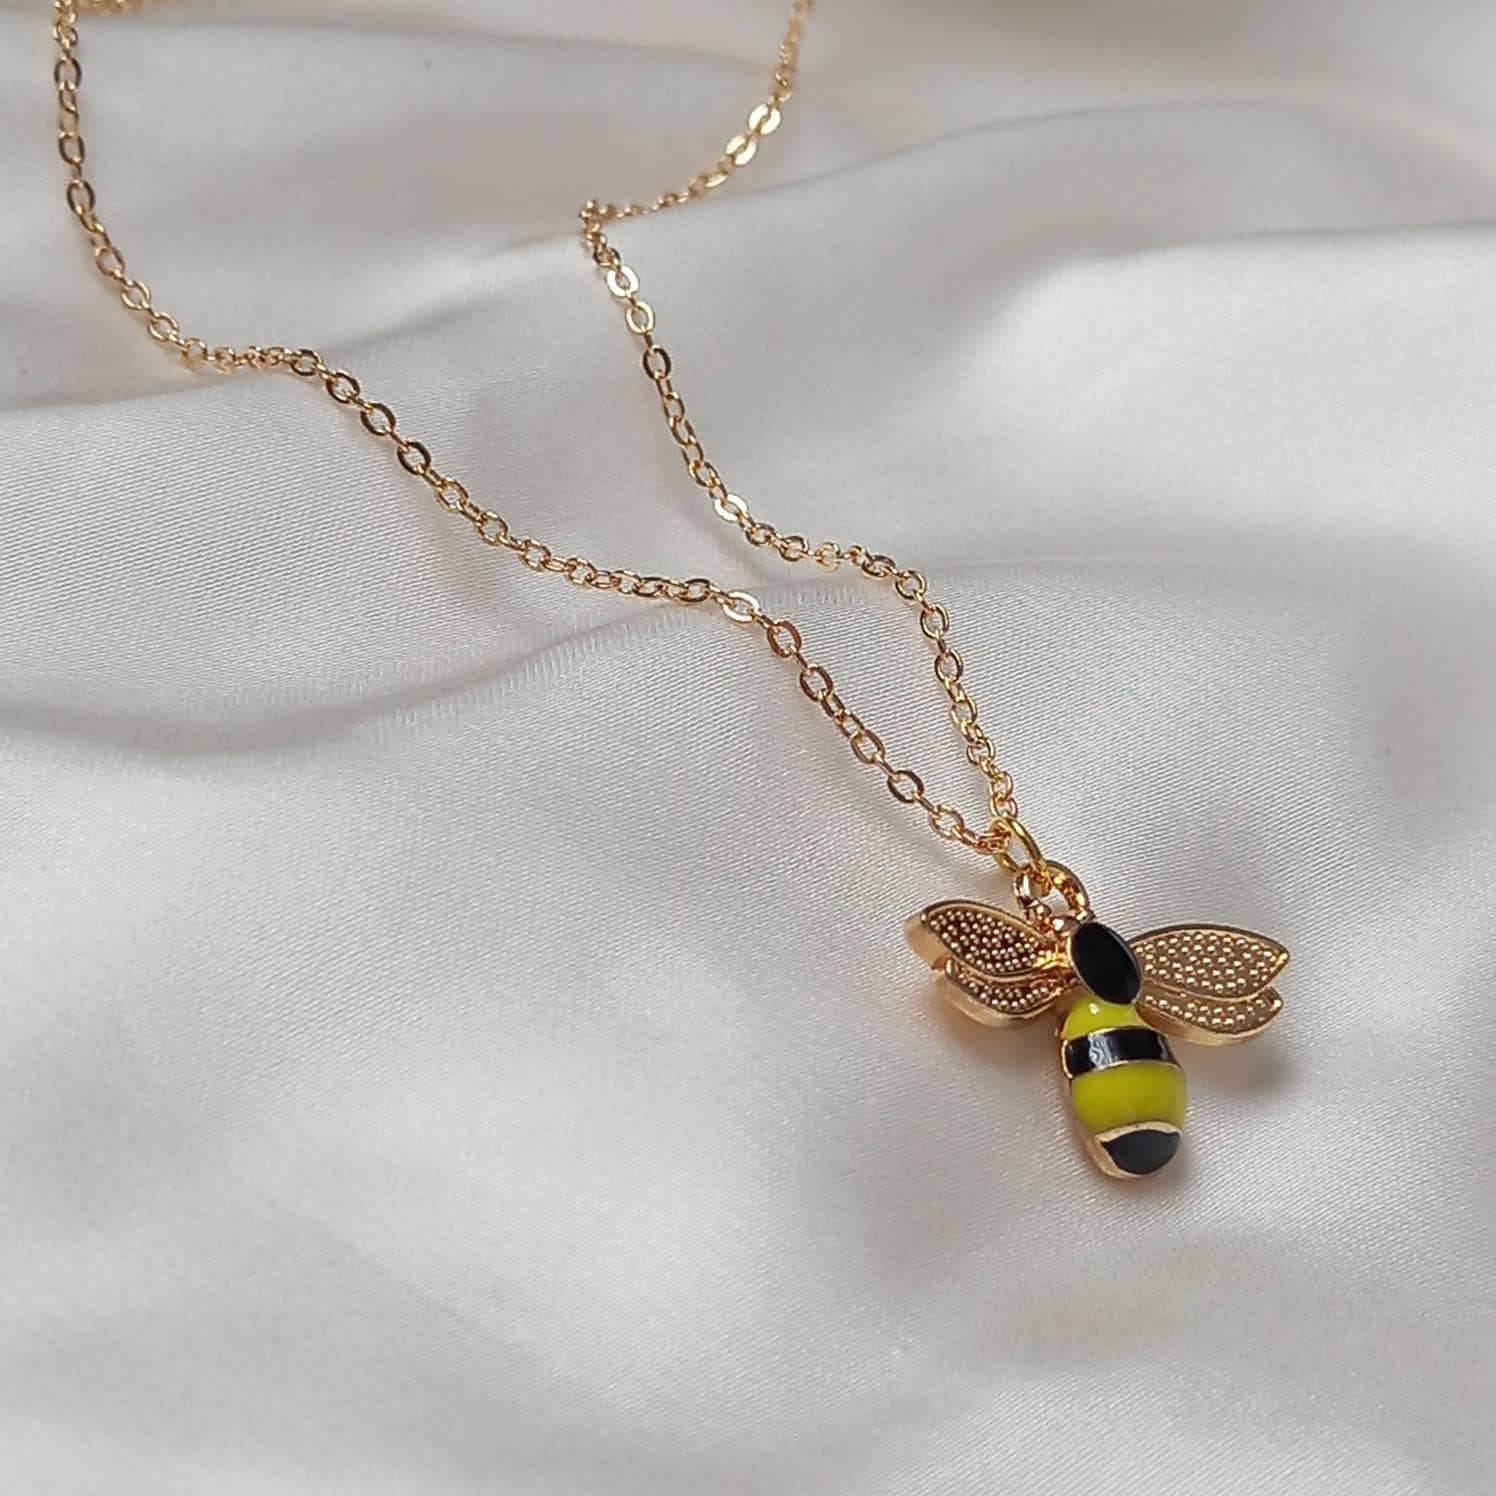 Gold Bumble Bee Pendant Necklace Gold Pendant Necklace Queen Bee Necklace -  Etsy